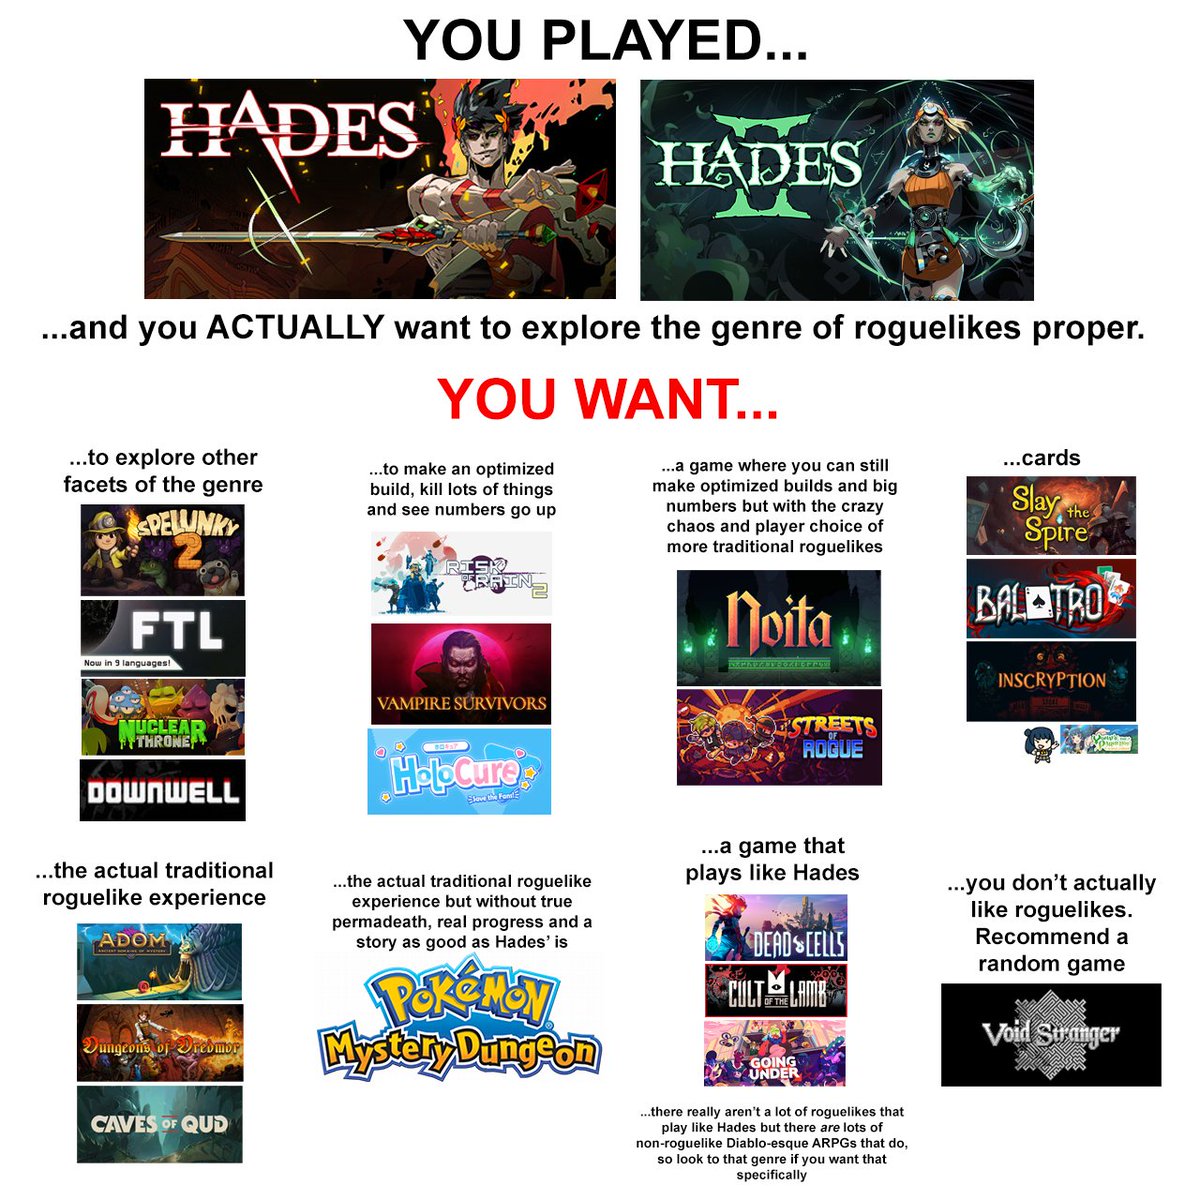 I had to break out the Photoshop for this one.

I am proud to present: the 'I played Hades and I want more roguelikes' infographic